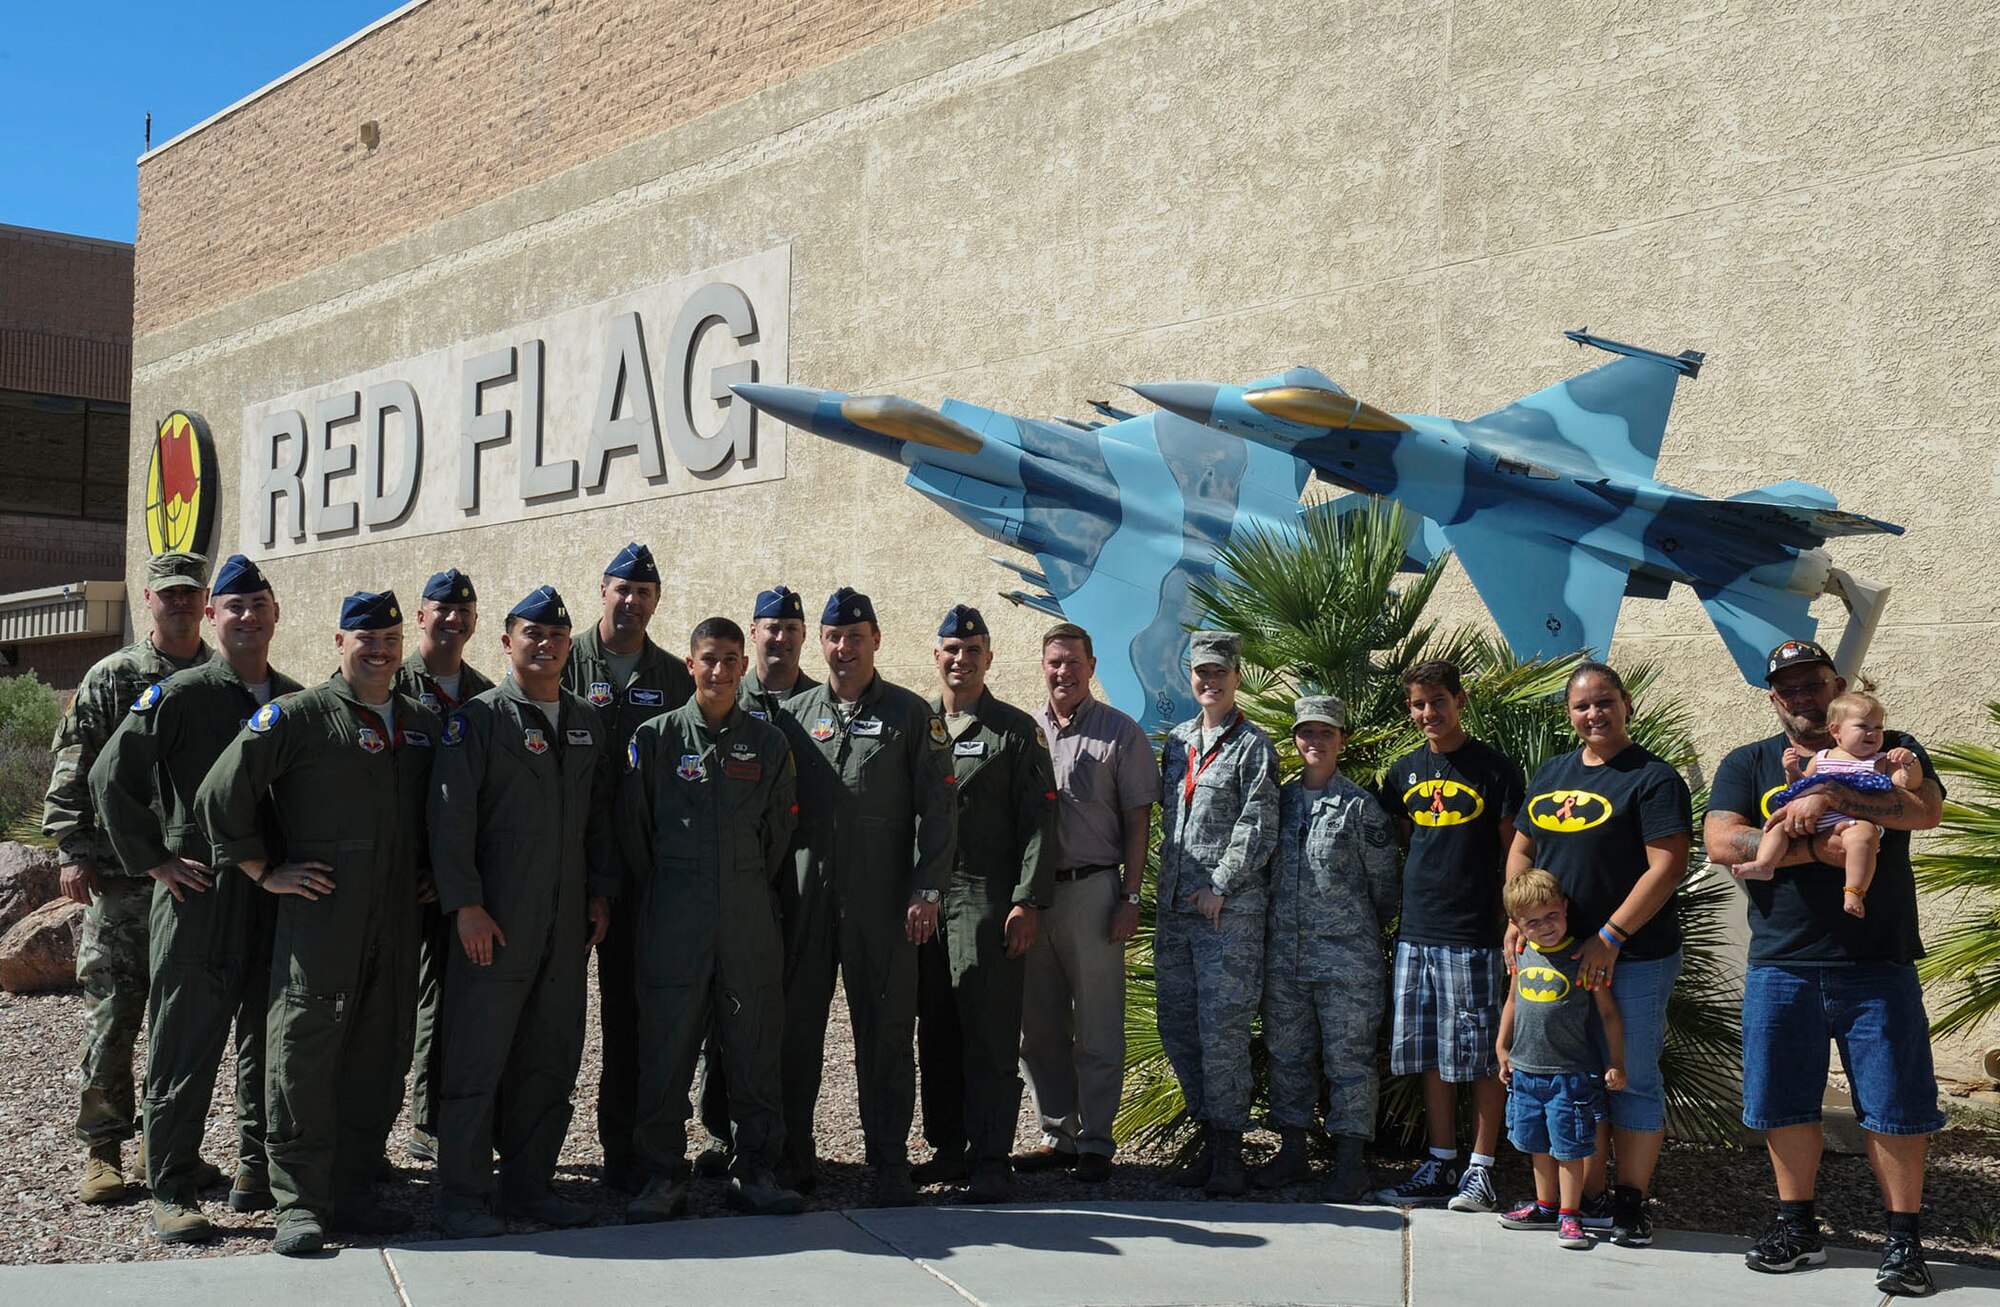 Key Players of the Red Flag exercise and the Rivas-Cook family pose for a photo in front of the Red Flag building at Nellis Air Force Base, Nev., July 19, 2016. One of Reymond’s wishes was to come to Nellis AFB during a Red Flag exercise. (U.S. Air Force photo by Staff Sgt. Darlene Seltmann)